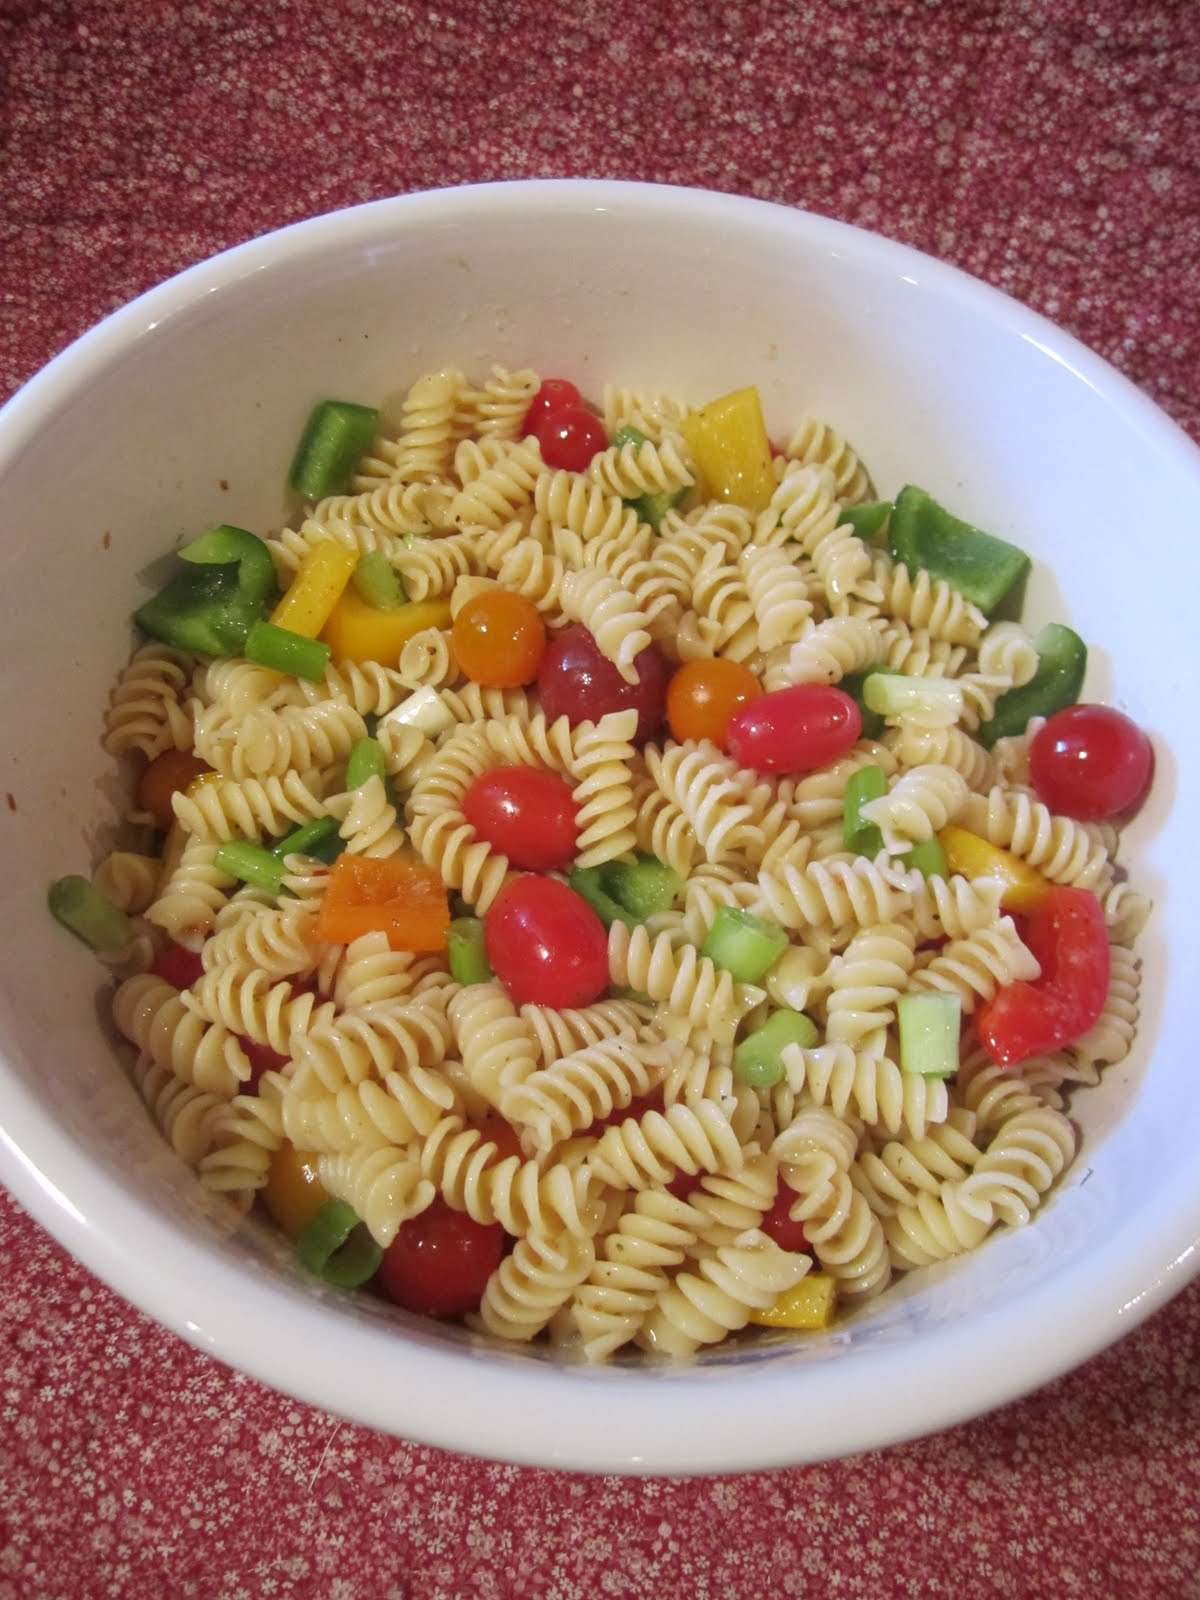 Wendys Hat: How to Make a Cold Pasta Salad {Recipe}